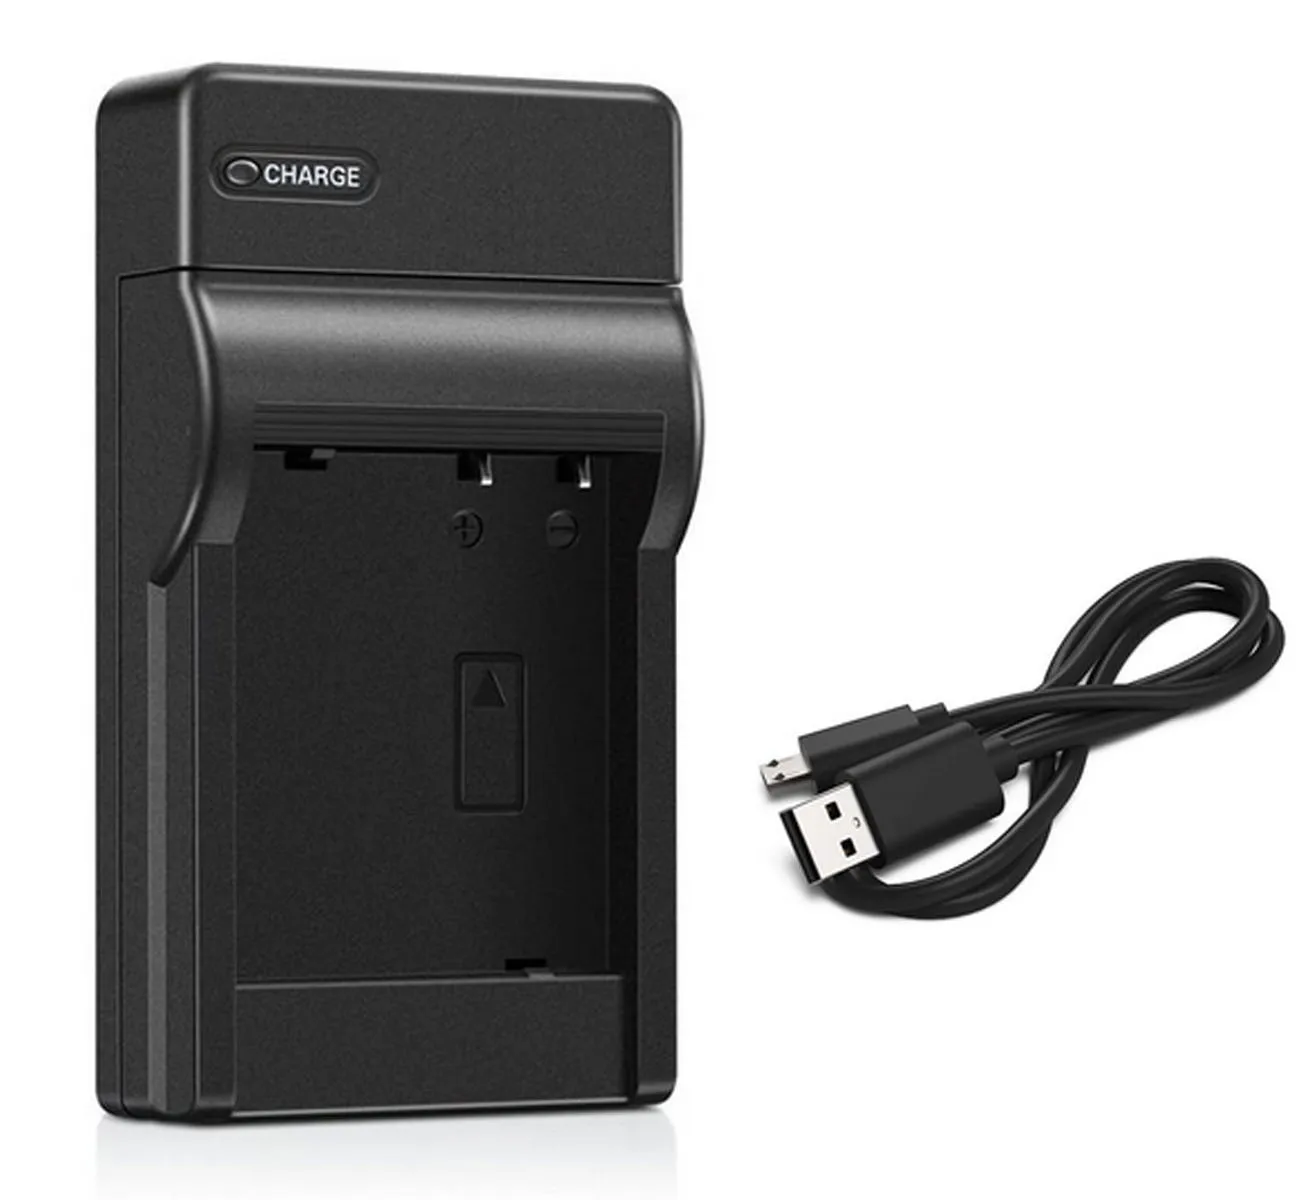 VPC-E1600TP Digital Camera VPC-E1500TP Battery Pack and USB Rapid Travel Batteries Charger for Sanyo Xacti VPC-E1403EX 